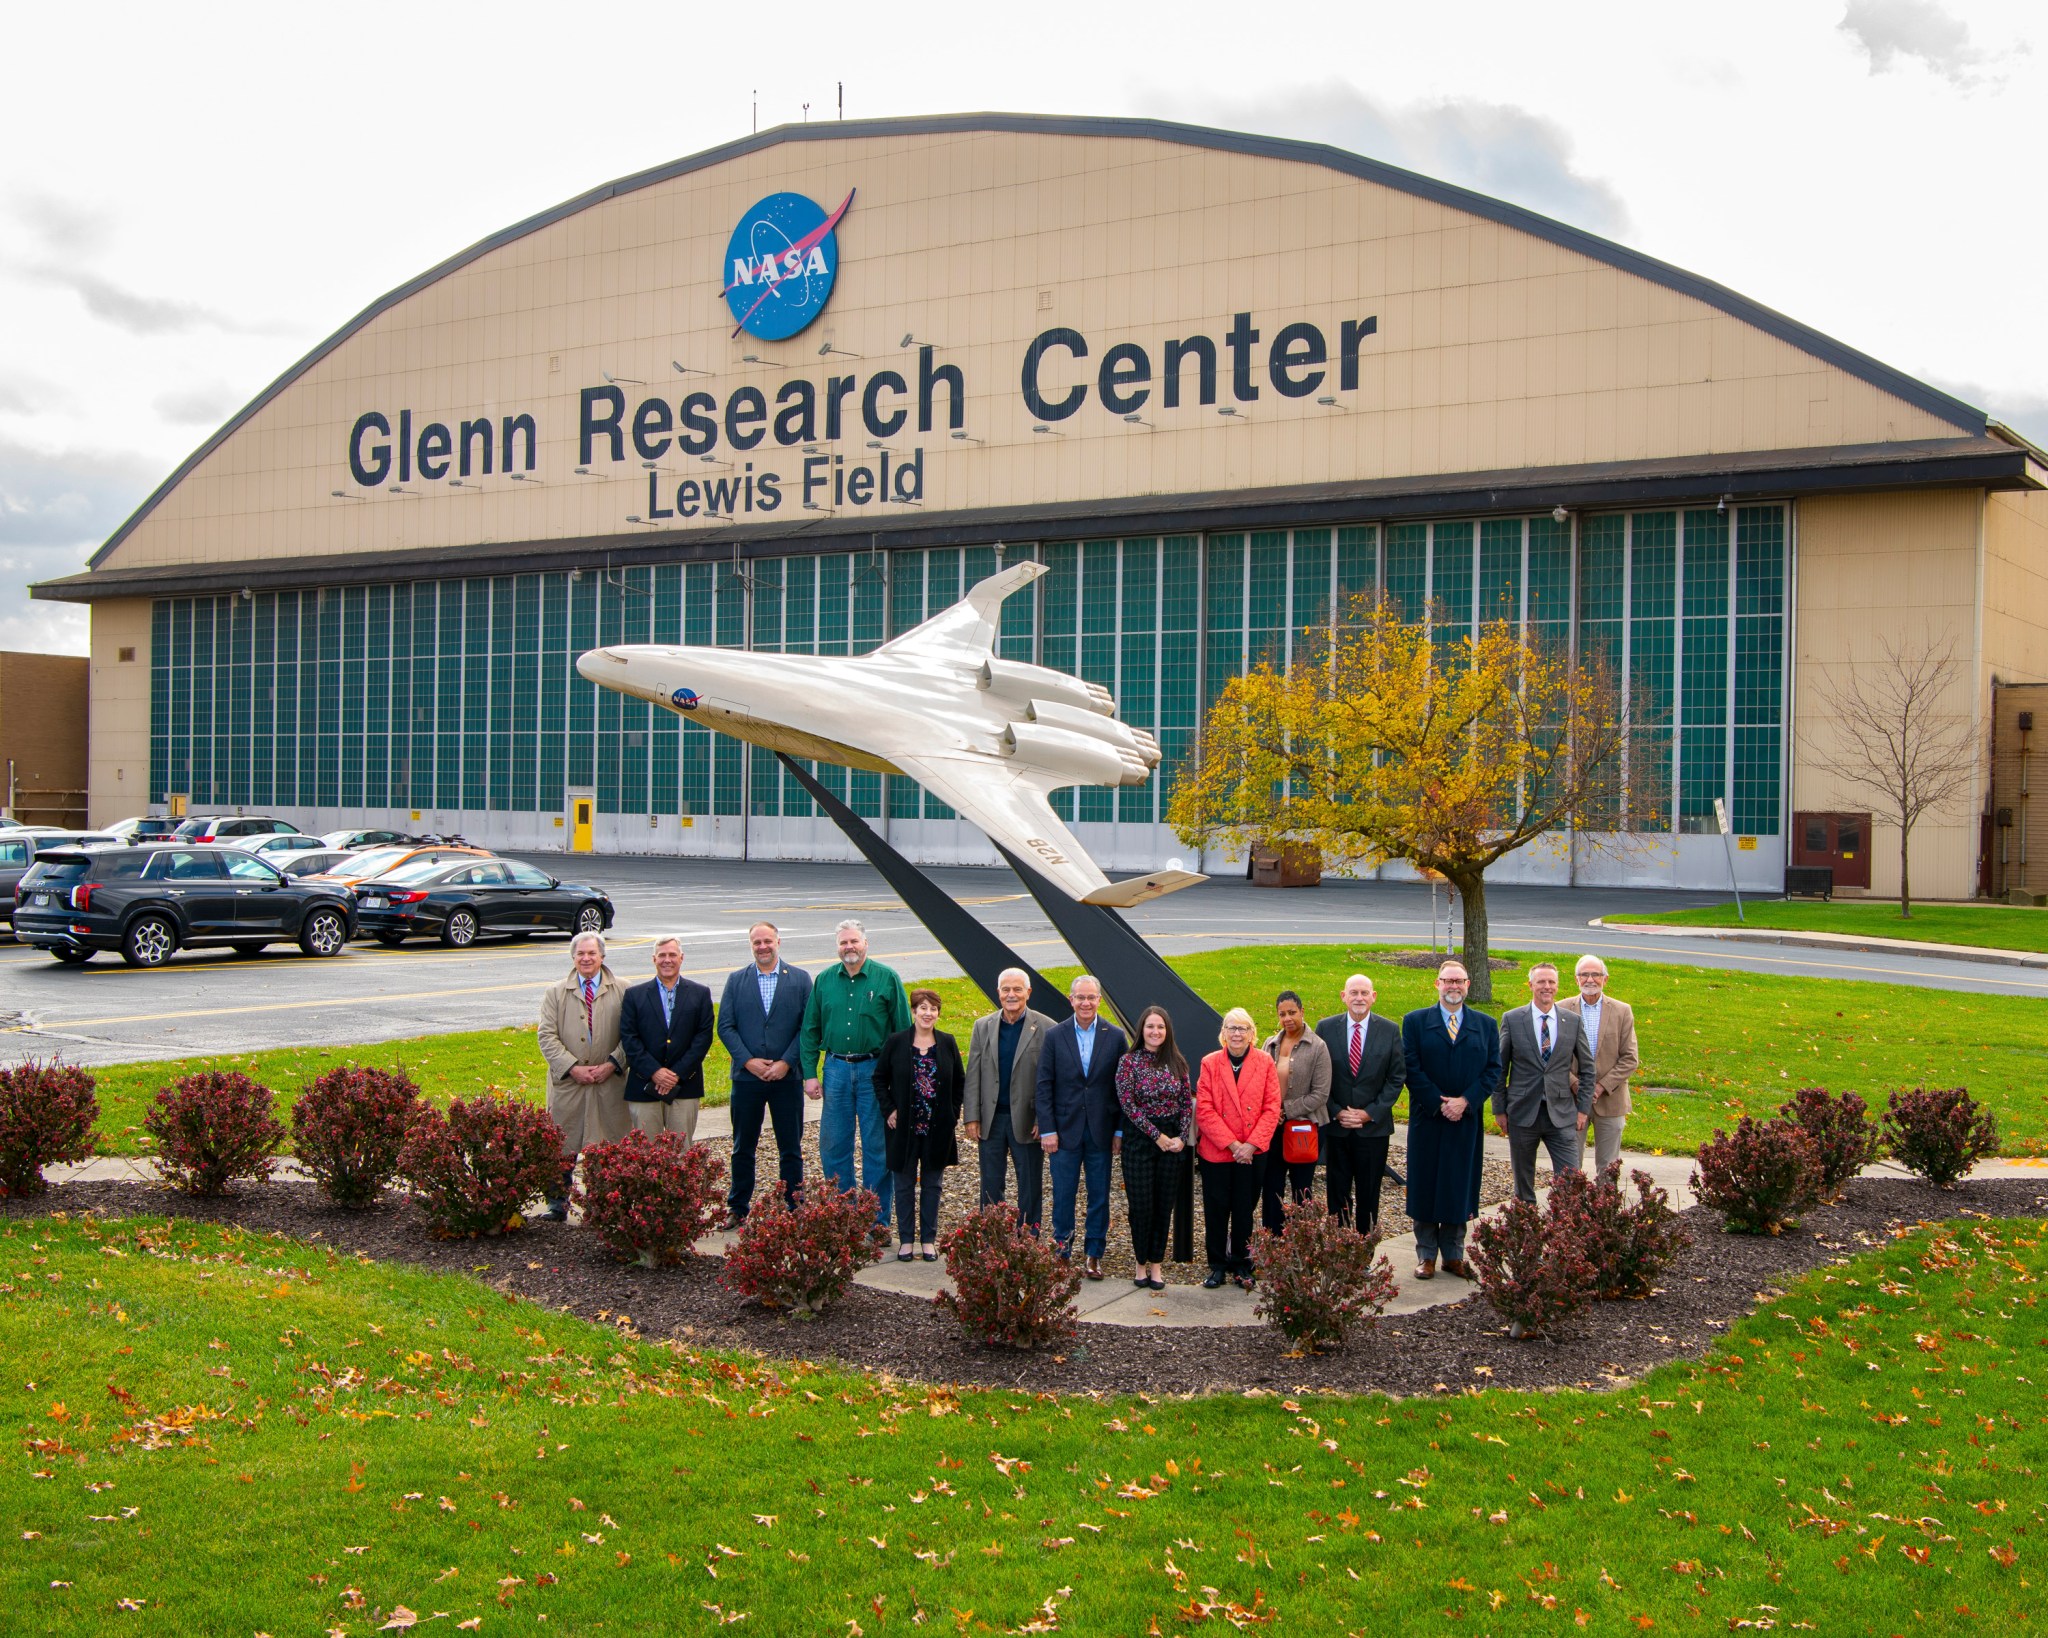 Members of the Northeast Ohio Mayors and City Managers Association pose in front of an airplane model by NASA Glenn Research Center’s hangar.